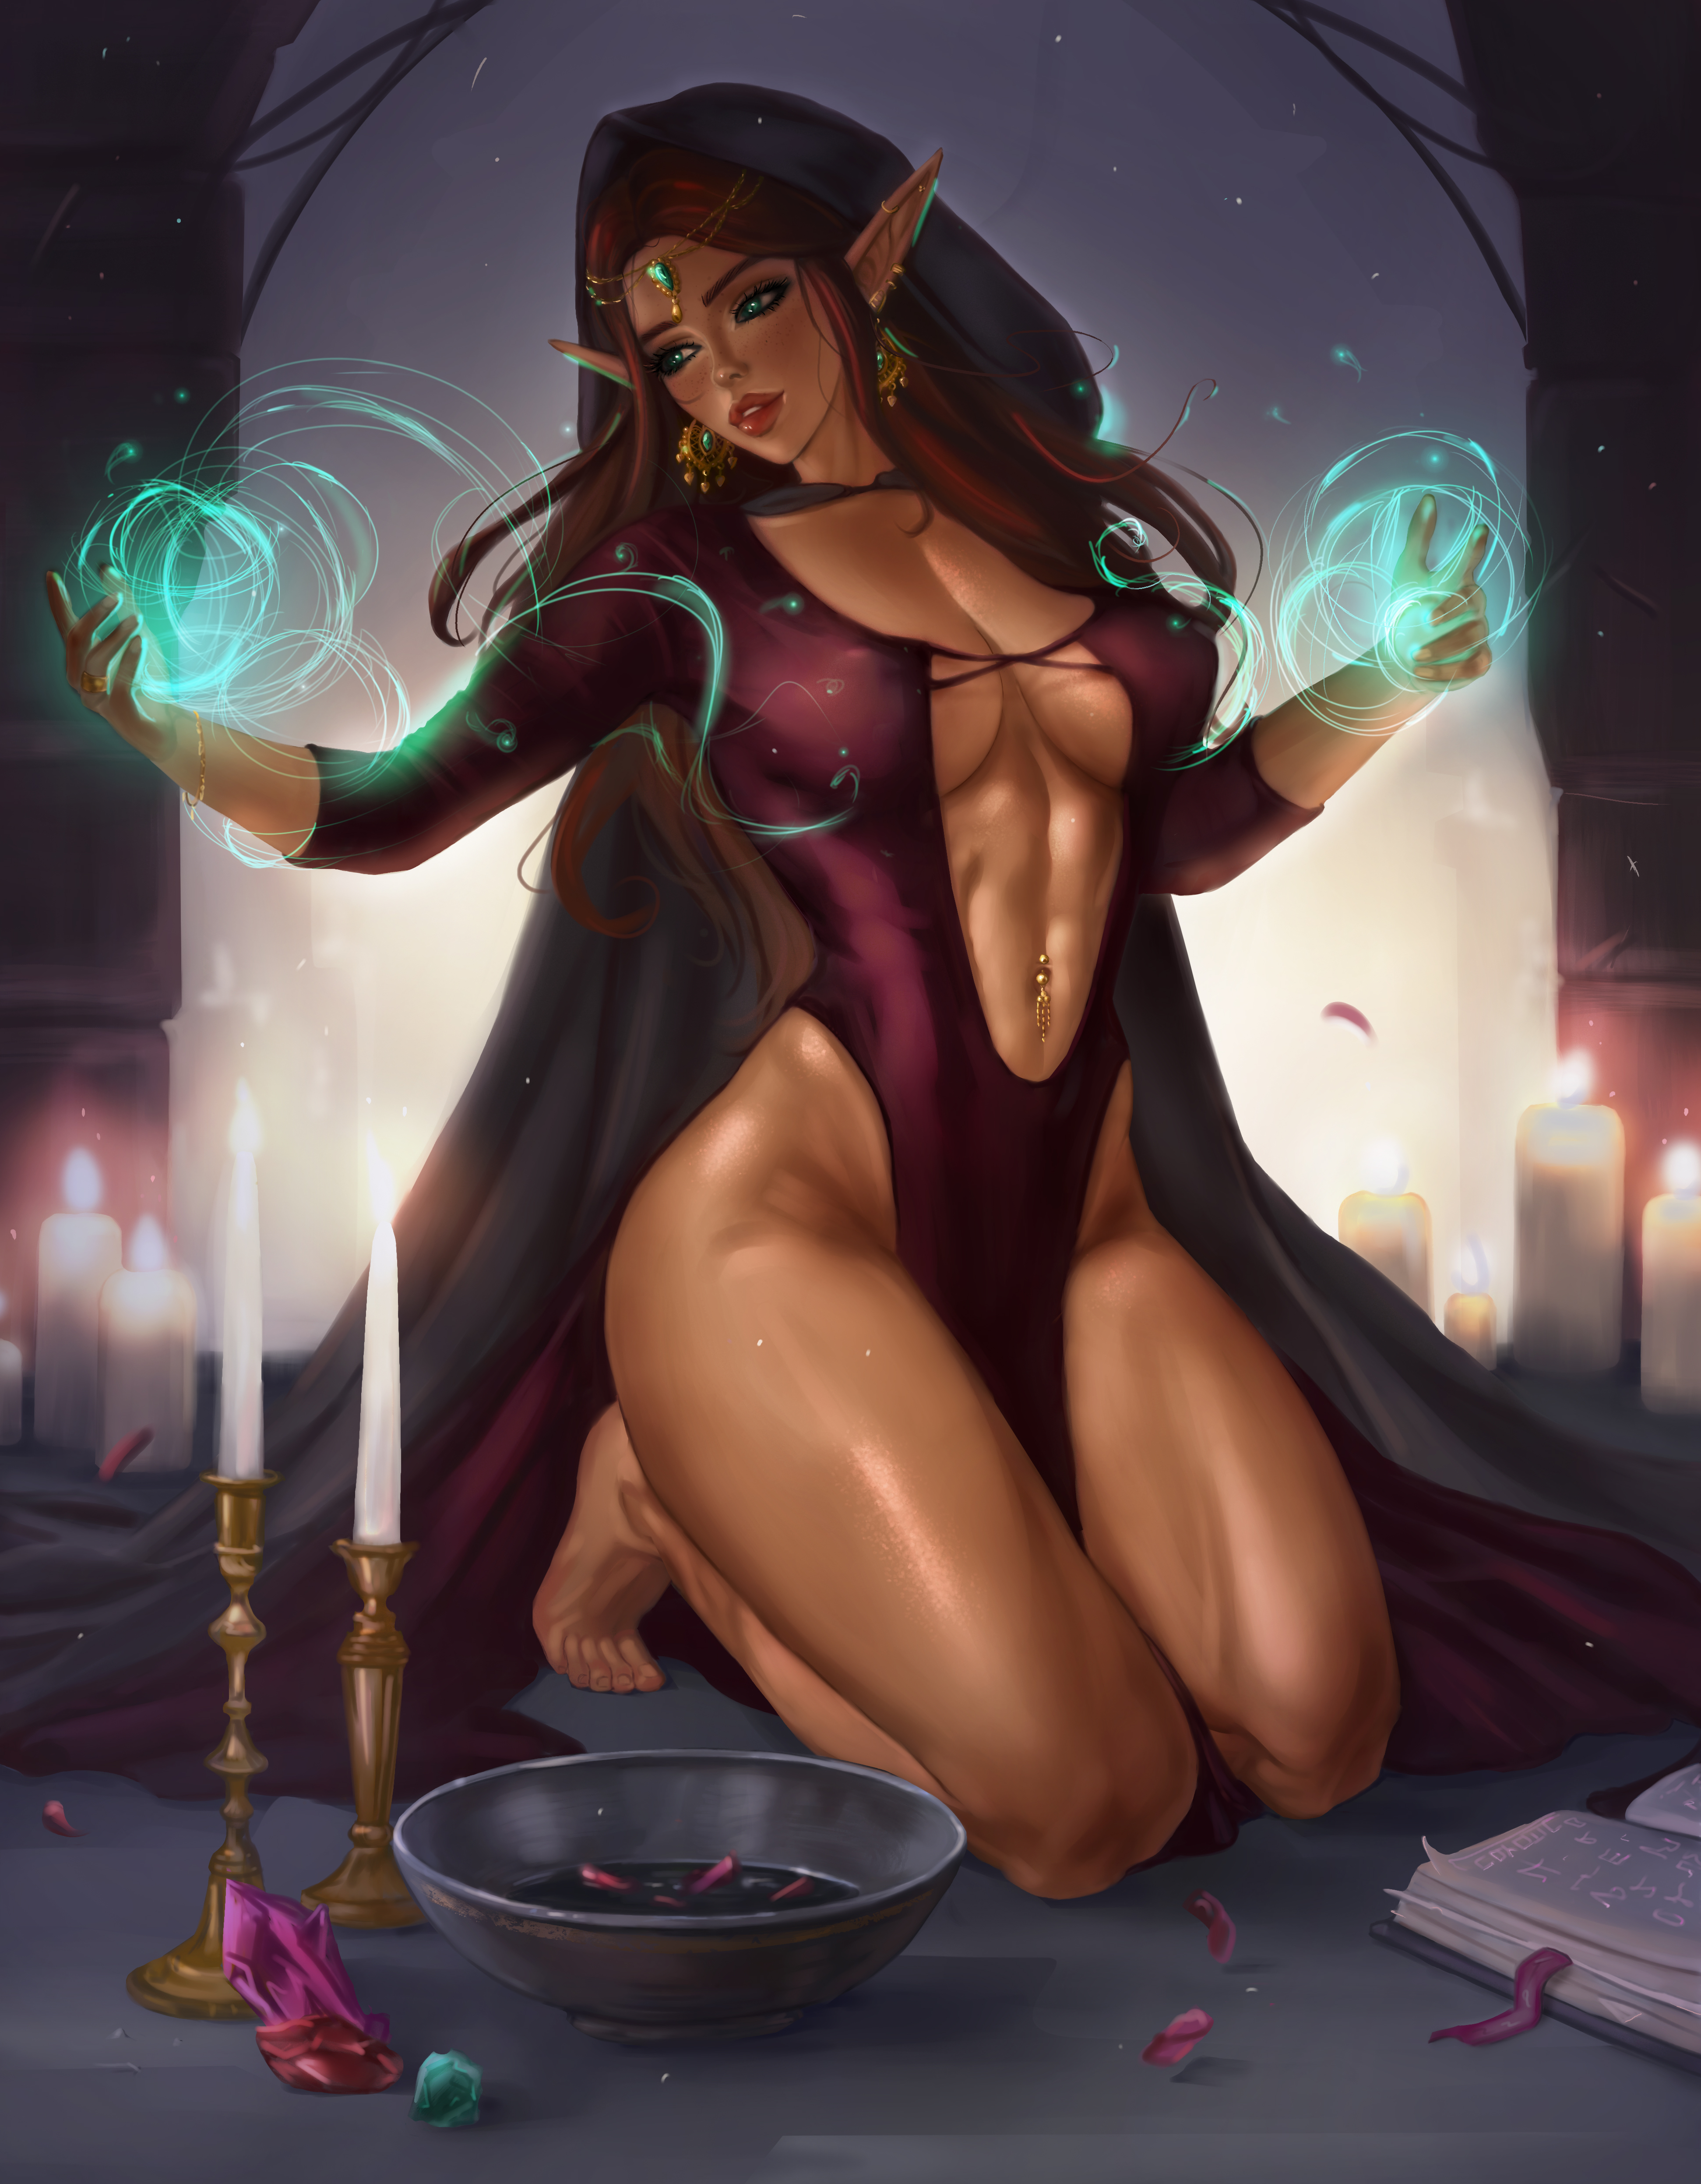 General 3885x4987 Coyotic drawing women elves jewelry dress cleavage barefoot cape hoods magician spell candles petals books fantasy girl fantasy art